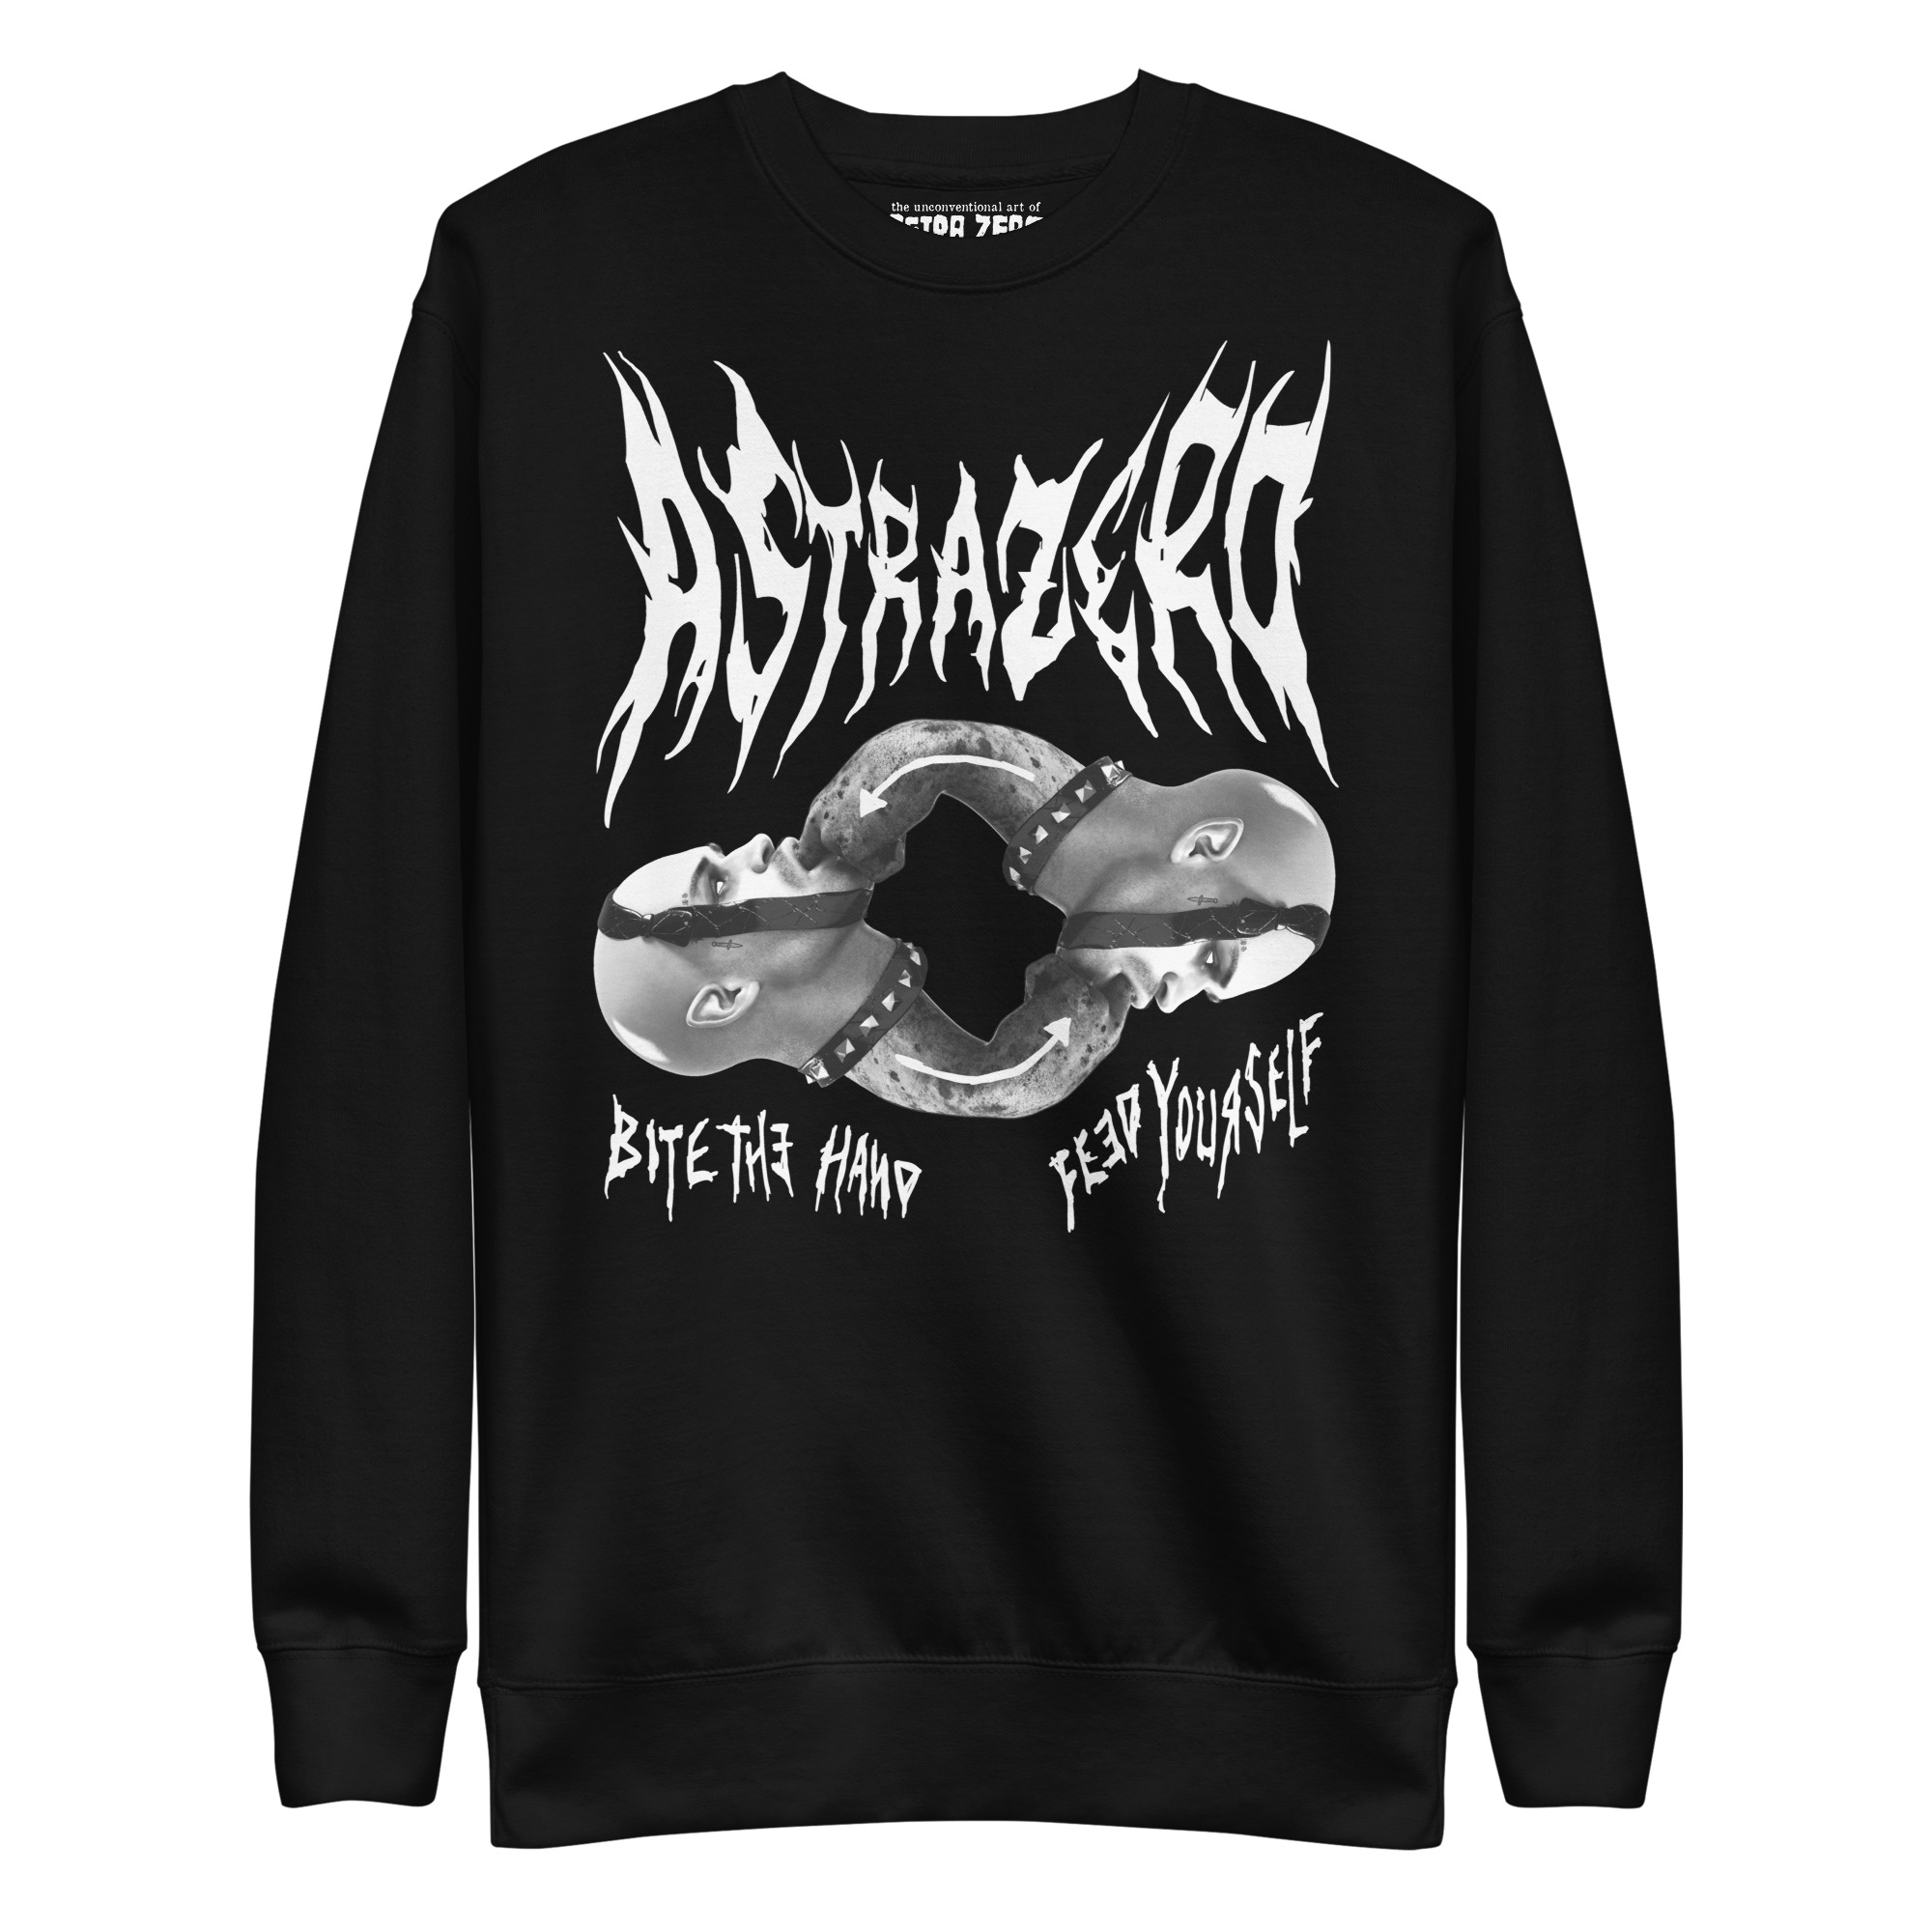 Featured image for “Bite the hand, Feed yourself - Unisex Premium Sweatshirt”